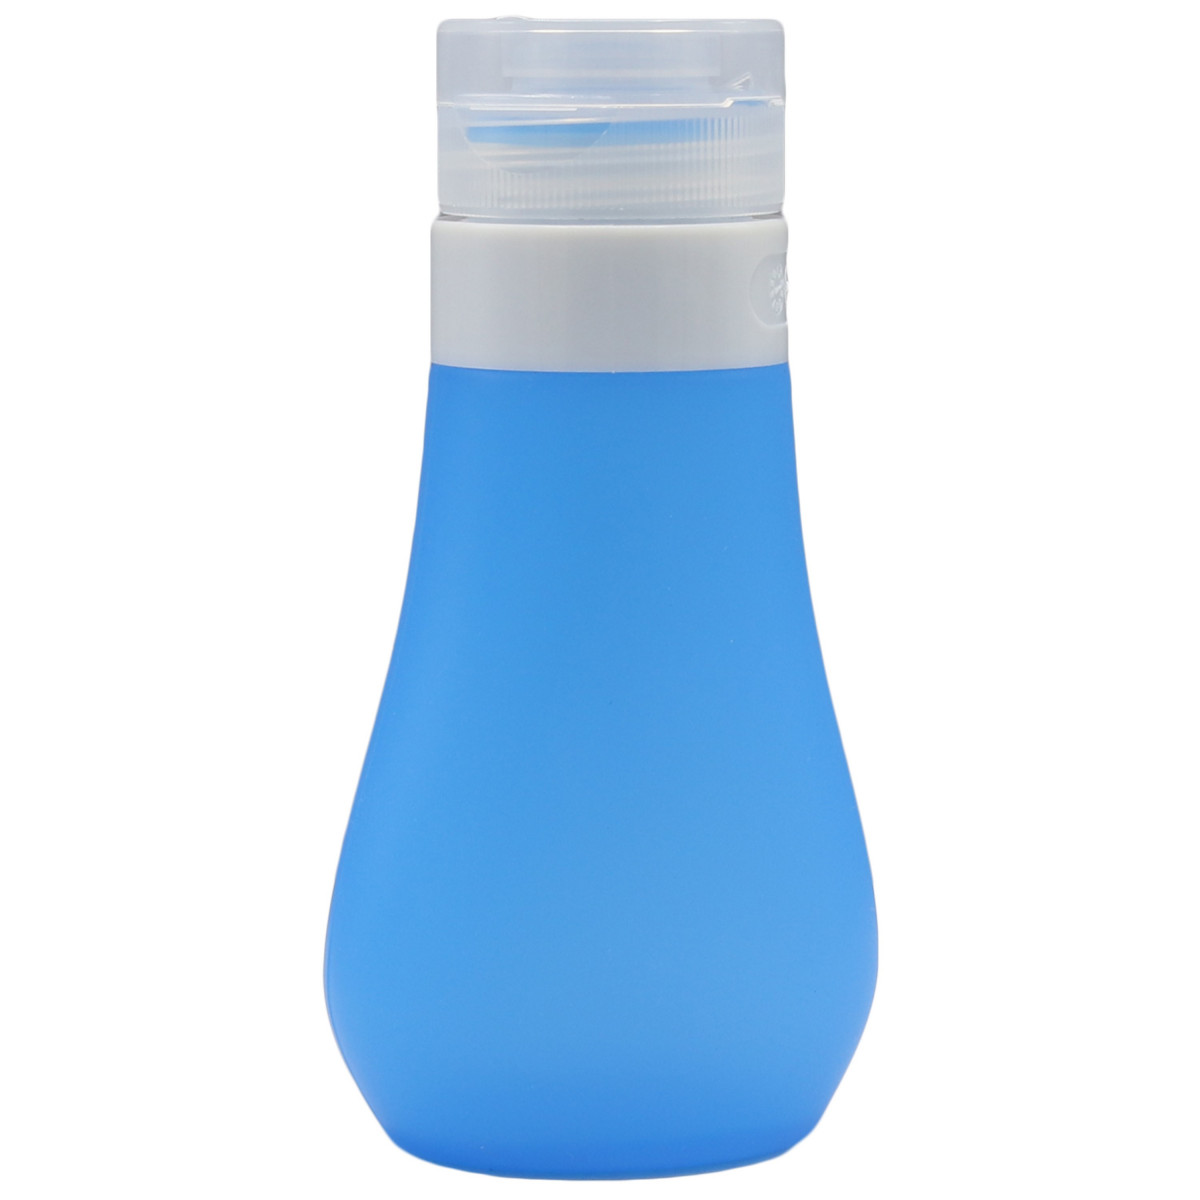 Equate 3 fl. oz. Silicone Travel Bottle Container